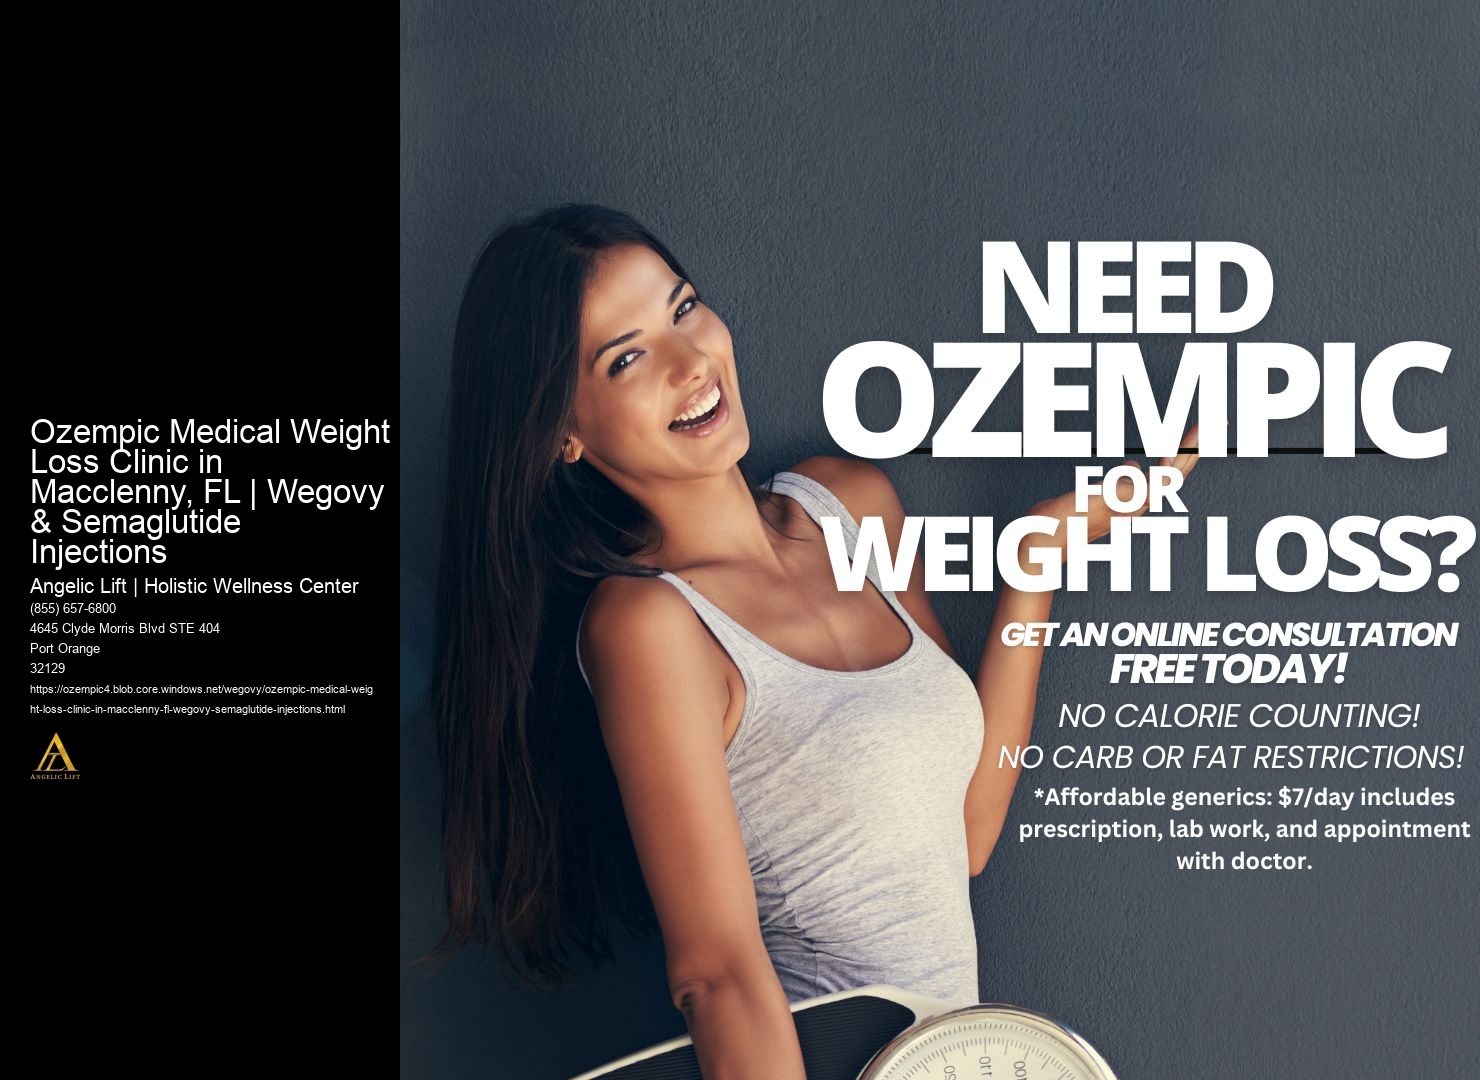 Ozempic Medical Weight Loss Clinic in Macclenny, FL | Wegovy & Semaglutide Injections